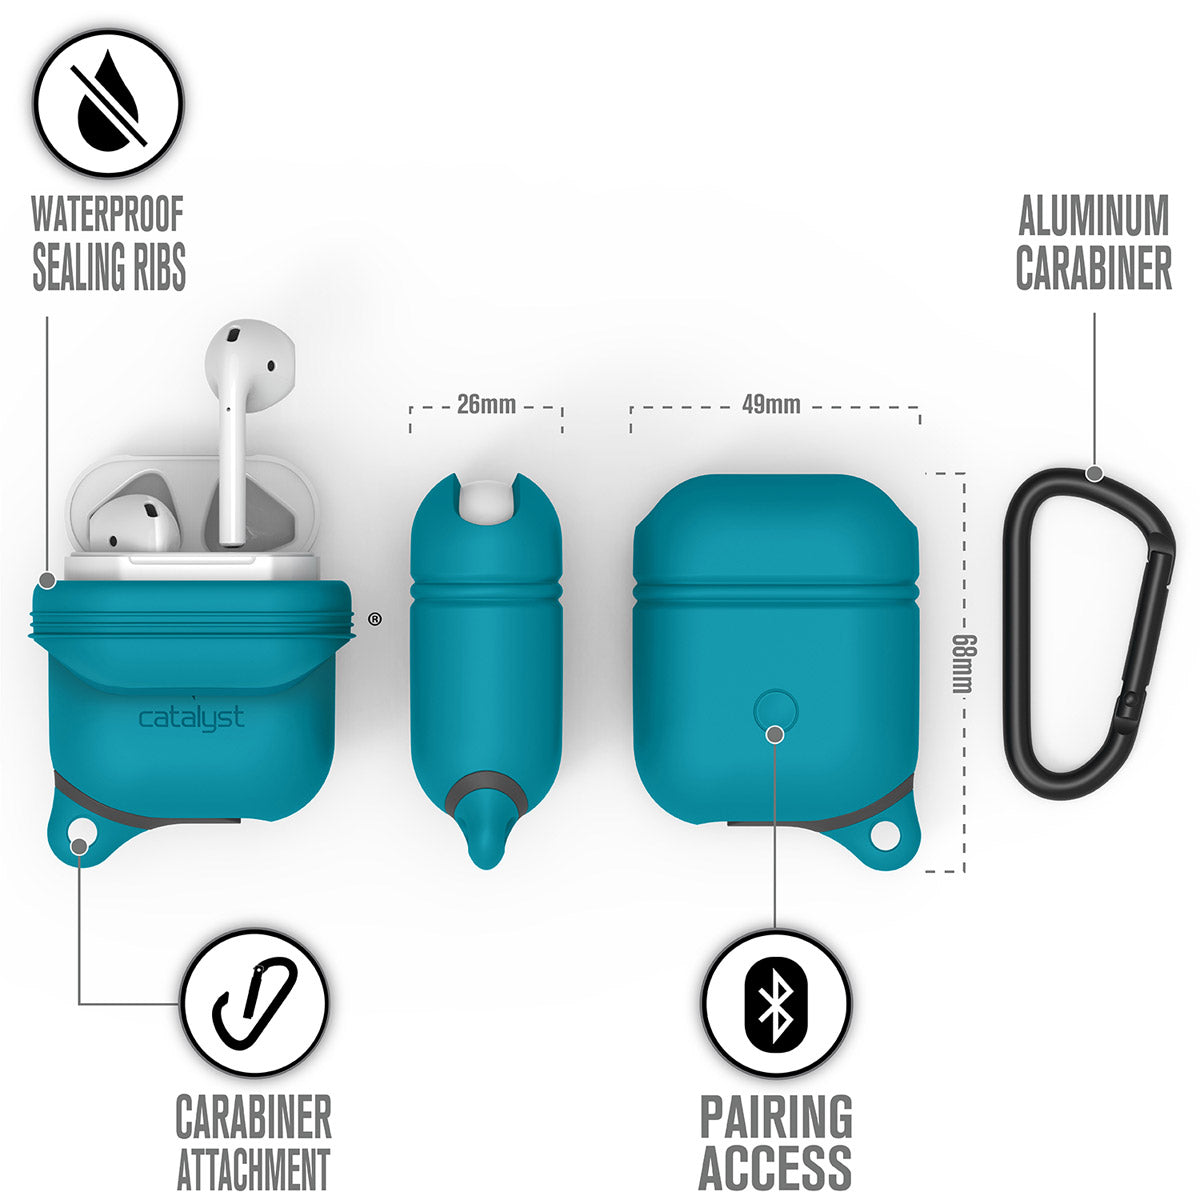 Catalyst airpods gen2/1 waterproof case + carabiner showing the case dimension and features in glacier blue text reads waterproof sealing ribs aluminum carabiner pairing access carabiner attachment